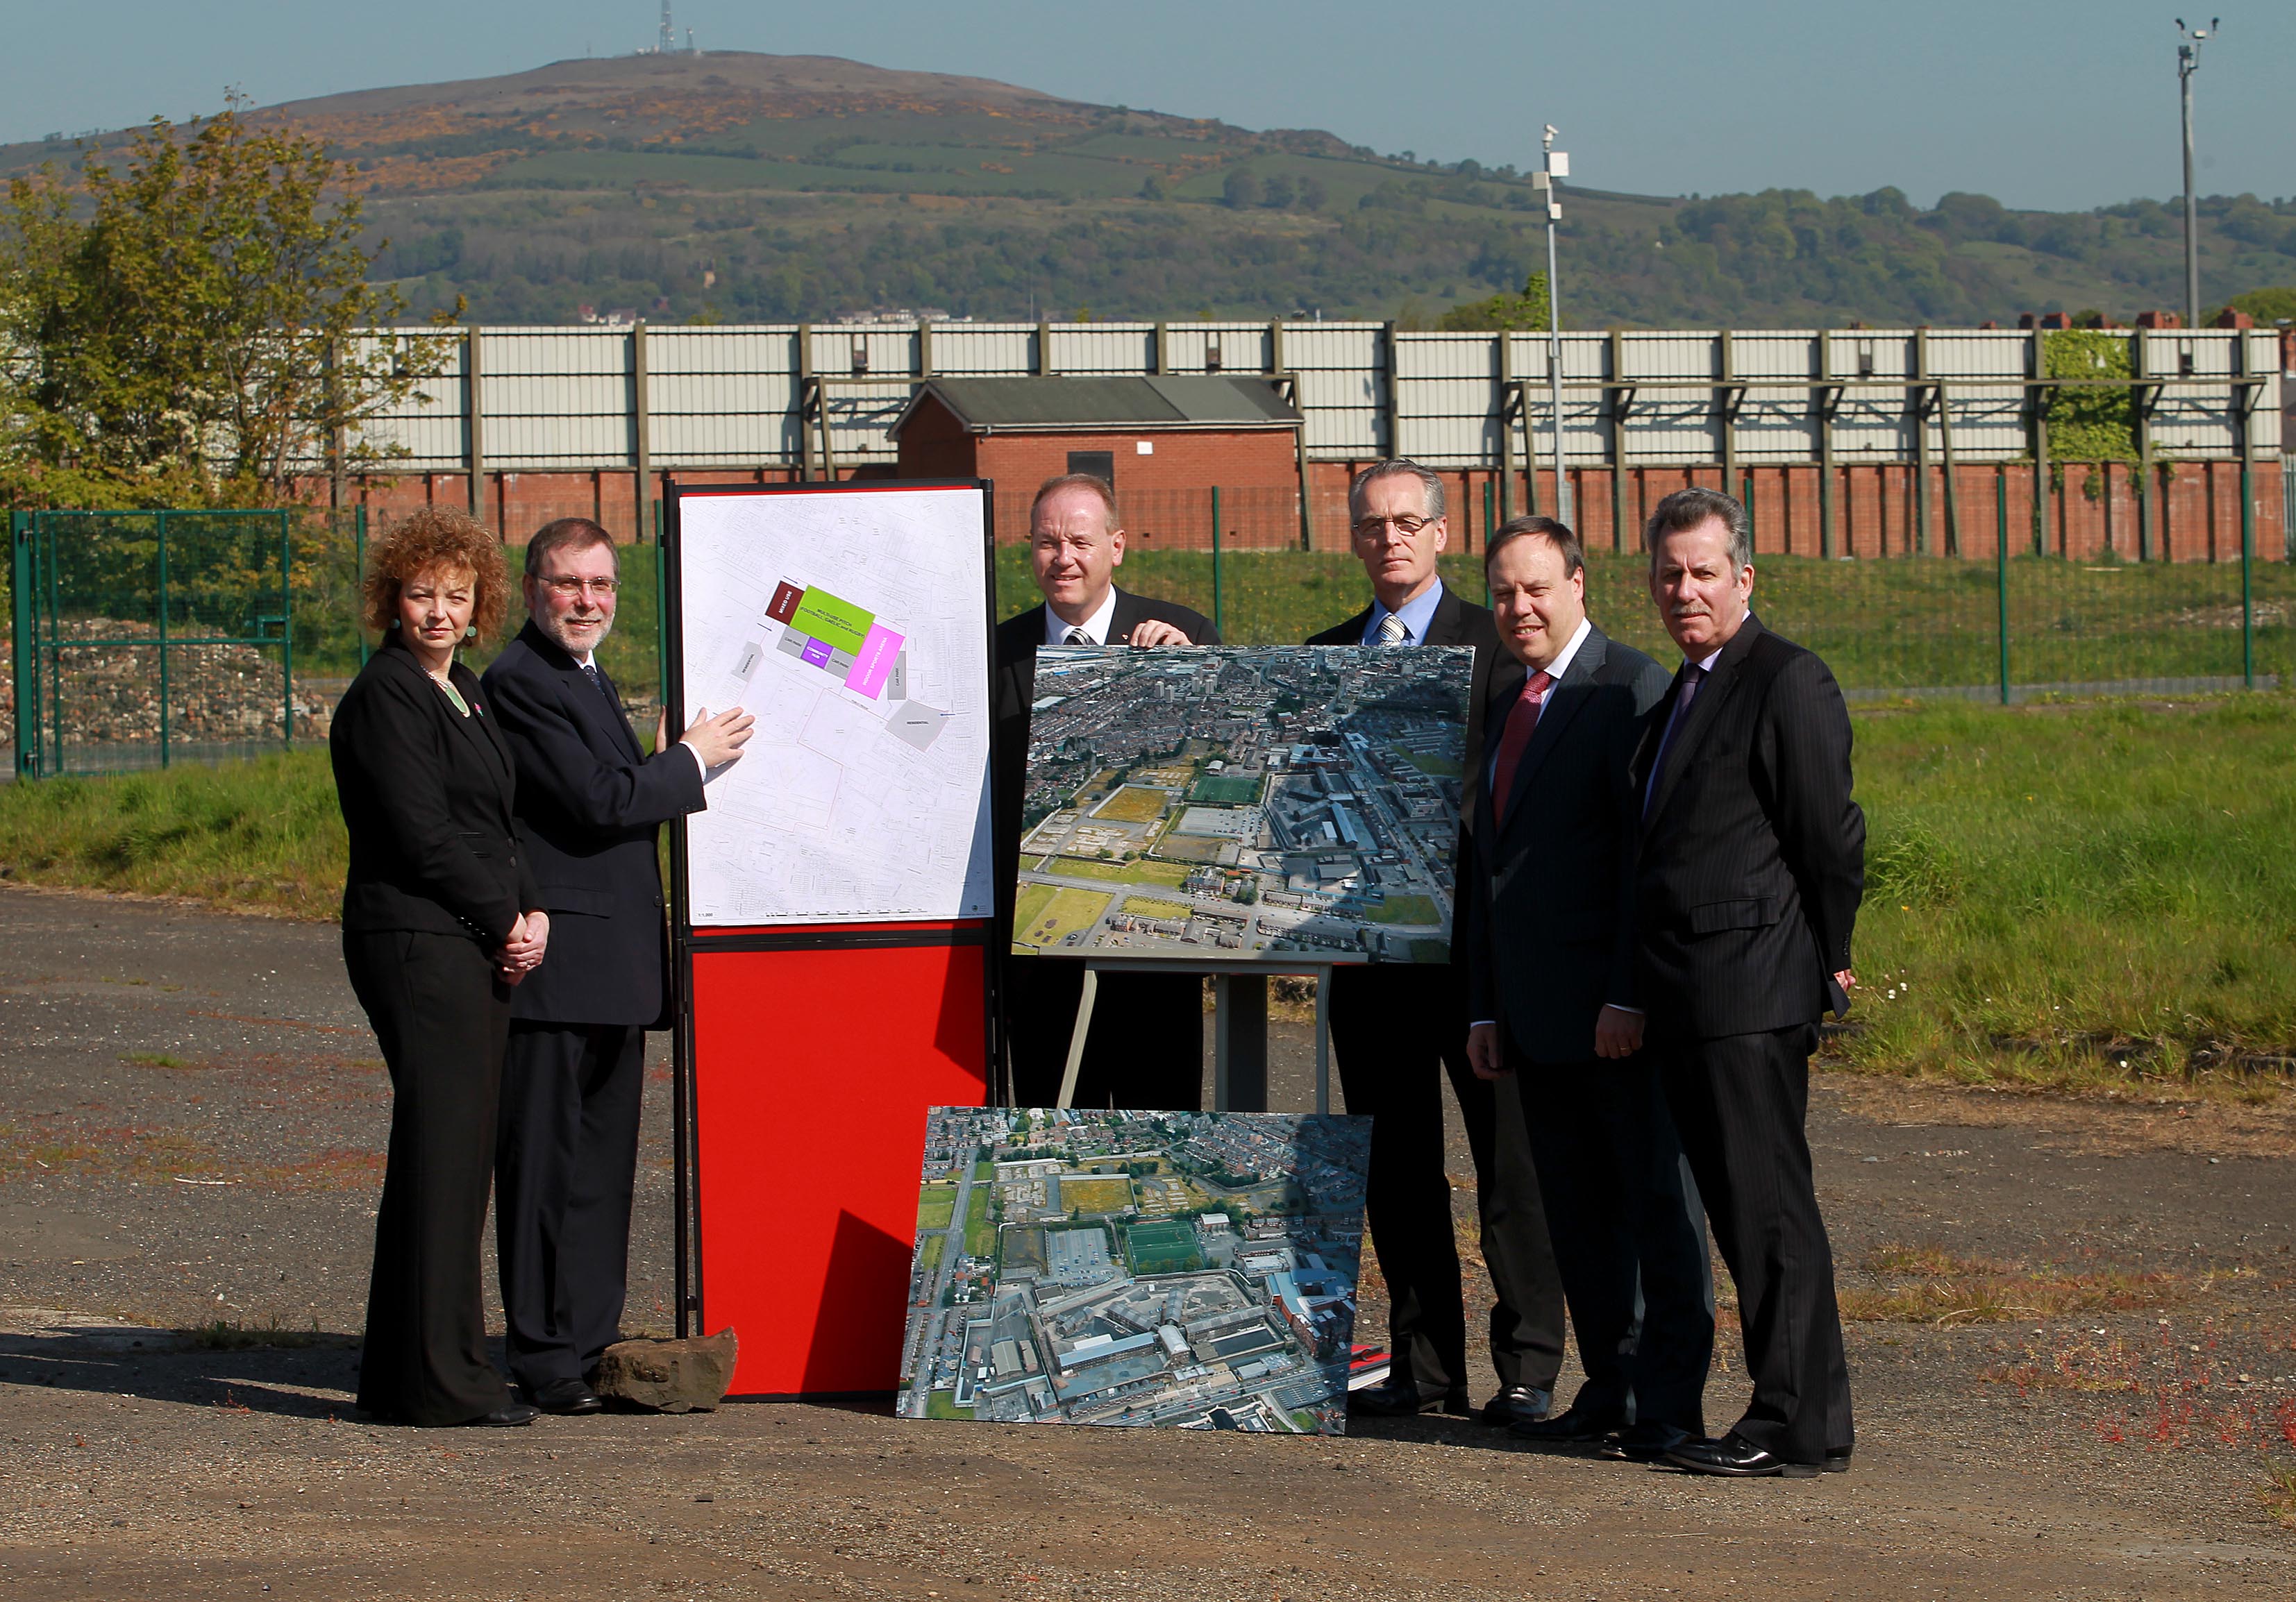 Girdwood transformation plan launched by Minister Carál Ní Chuilín, Minister Nelson McCausland, William Humphrey MLA, Gerry Kelly MLA, Nigel Dodds MP and Alban Maginness MLA.